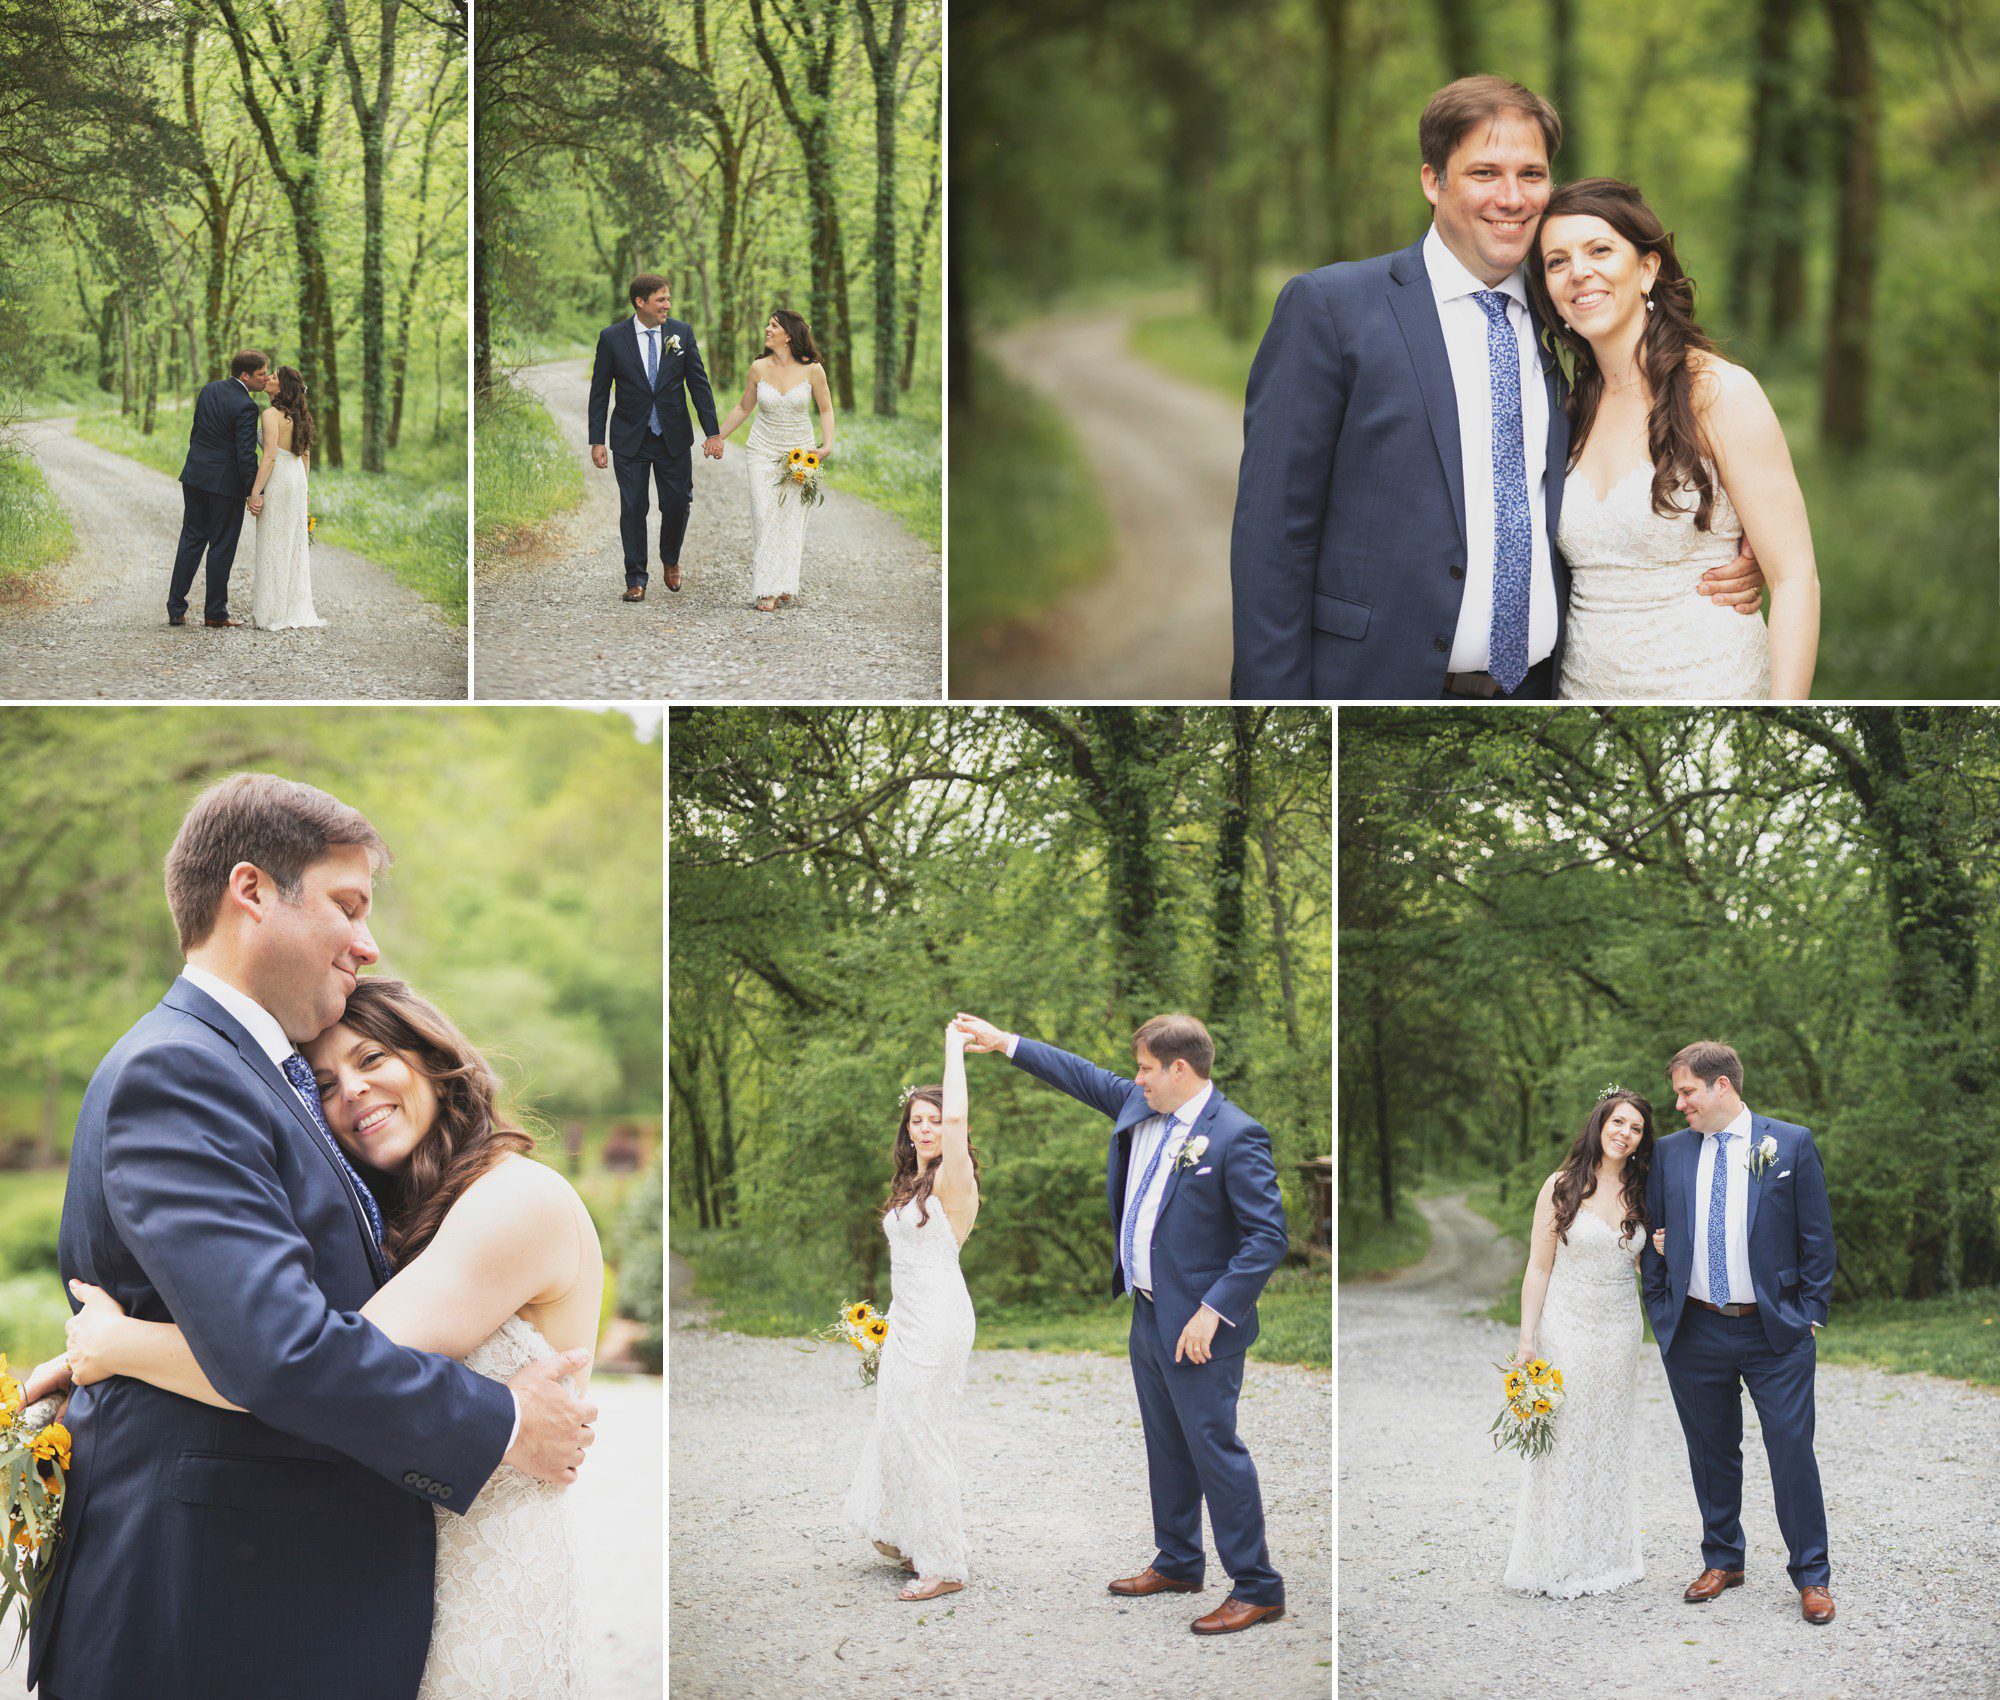 Bride and groom formal photos in woods after elopement wedding ceremony at Butterfly Hollow in Gordonsville, TN. Photos by Krista Lee Photography. 